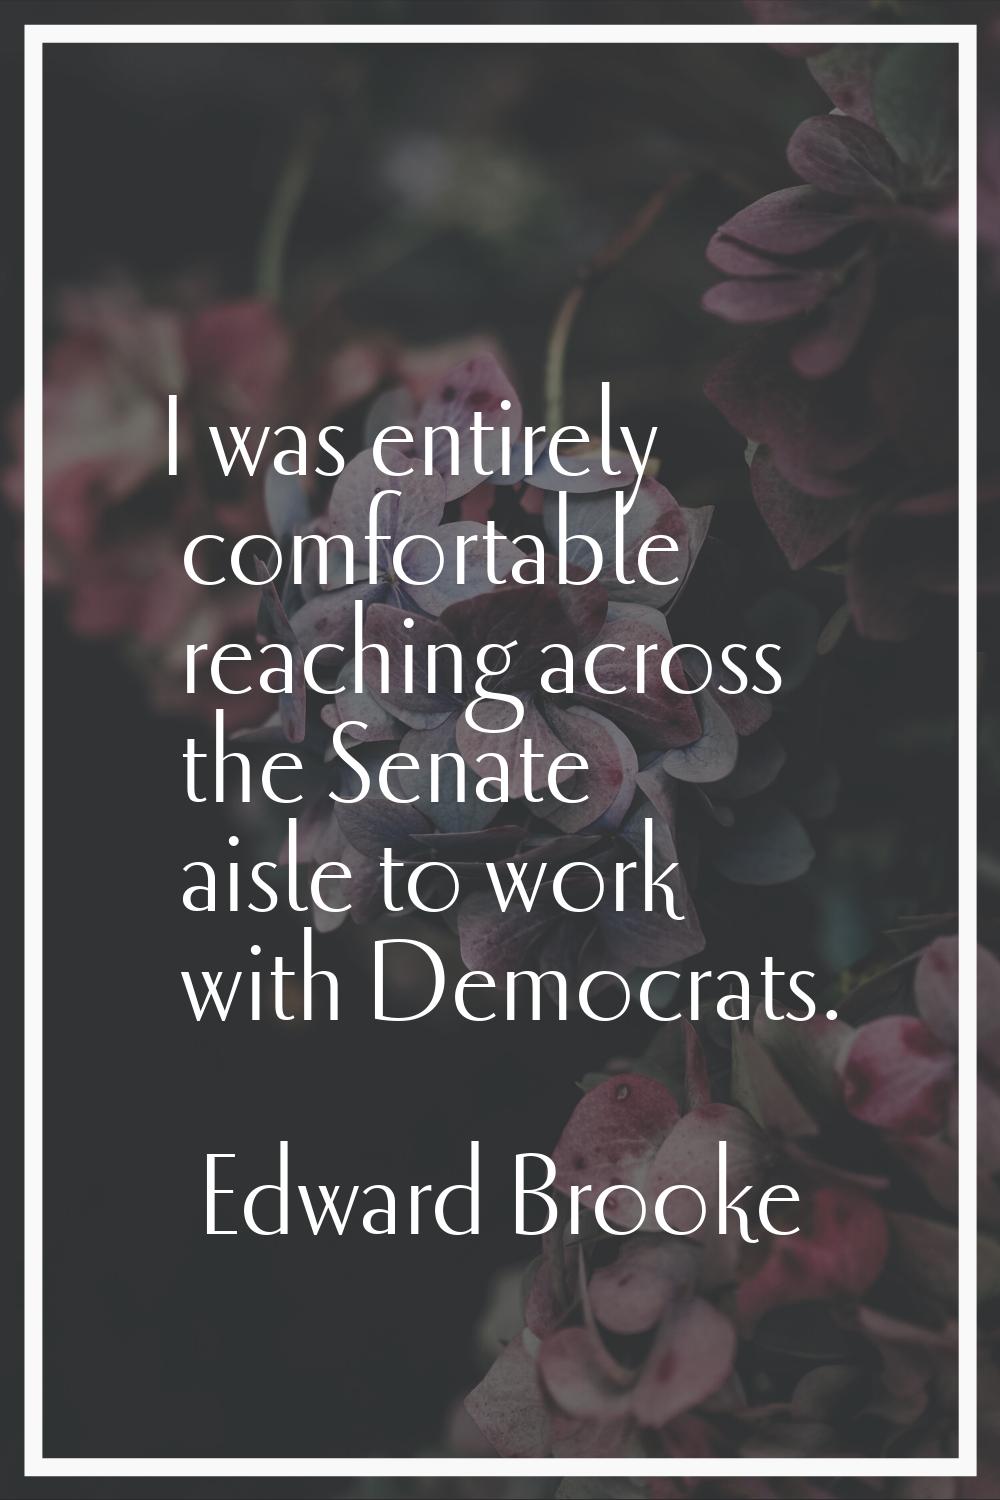 I was entirely comfortable reaching across the Senate aisle to work with Democrats.